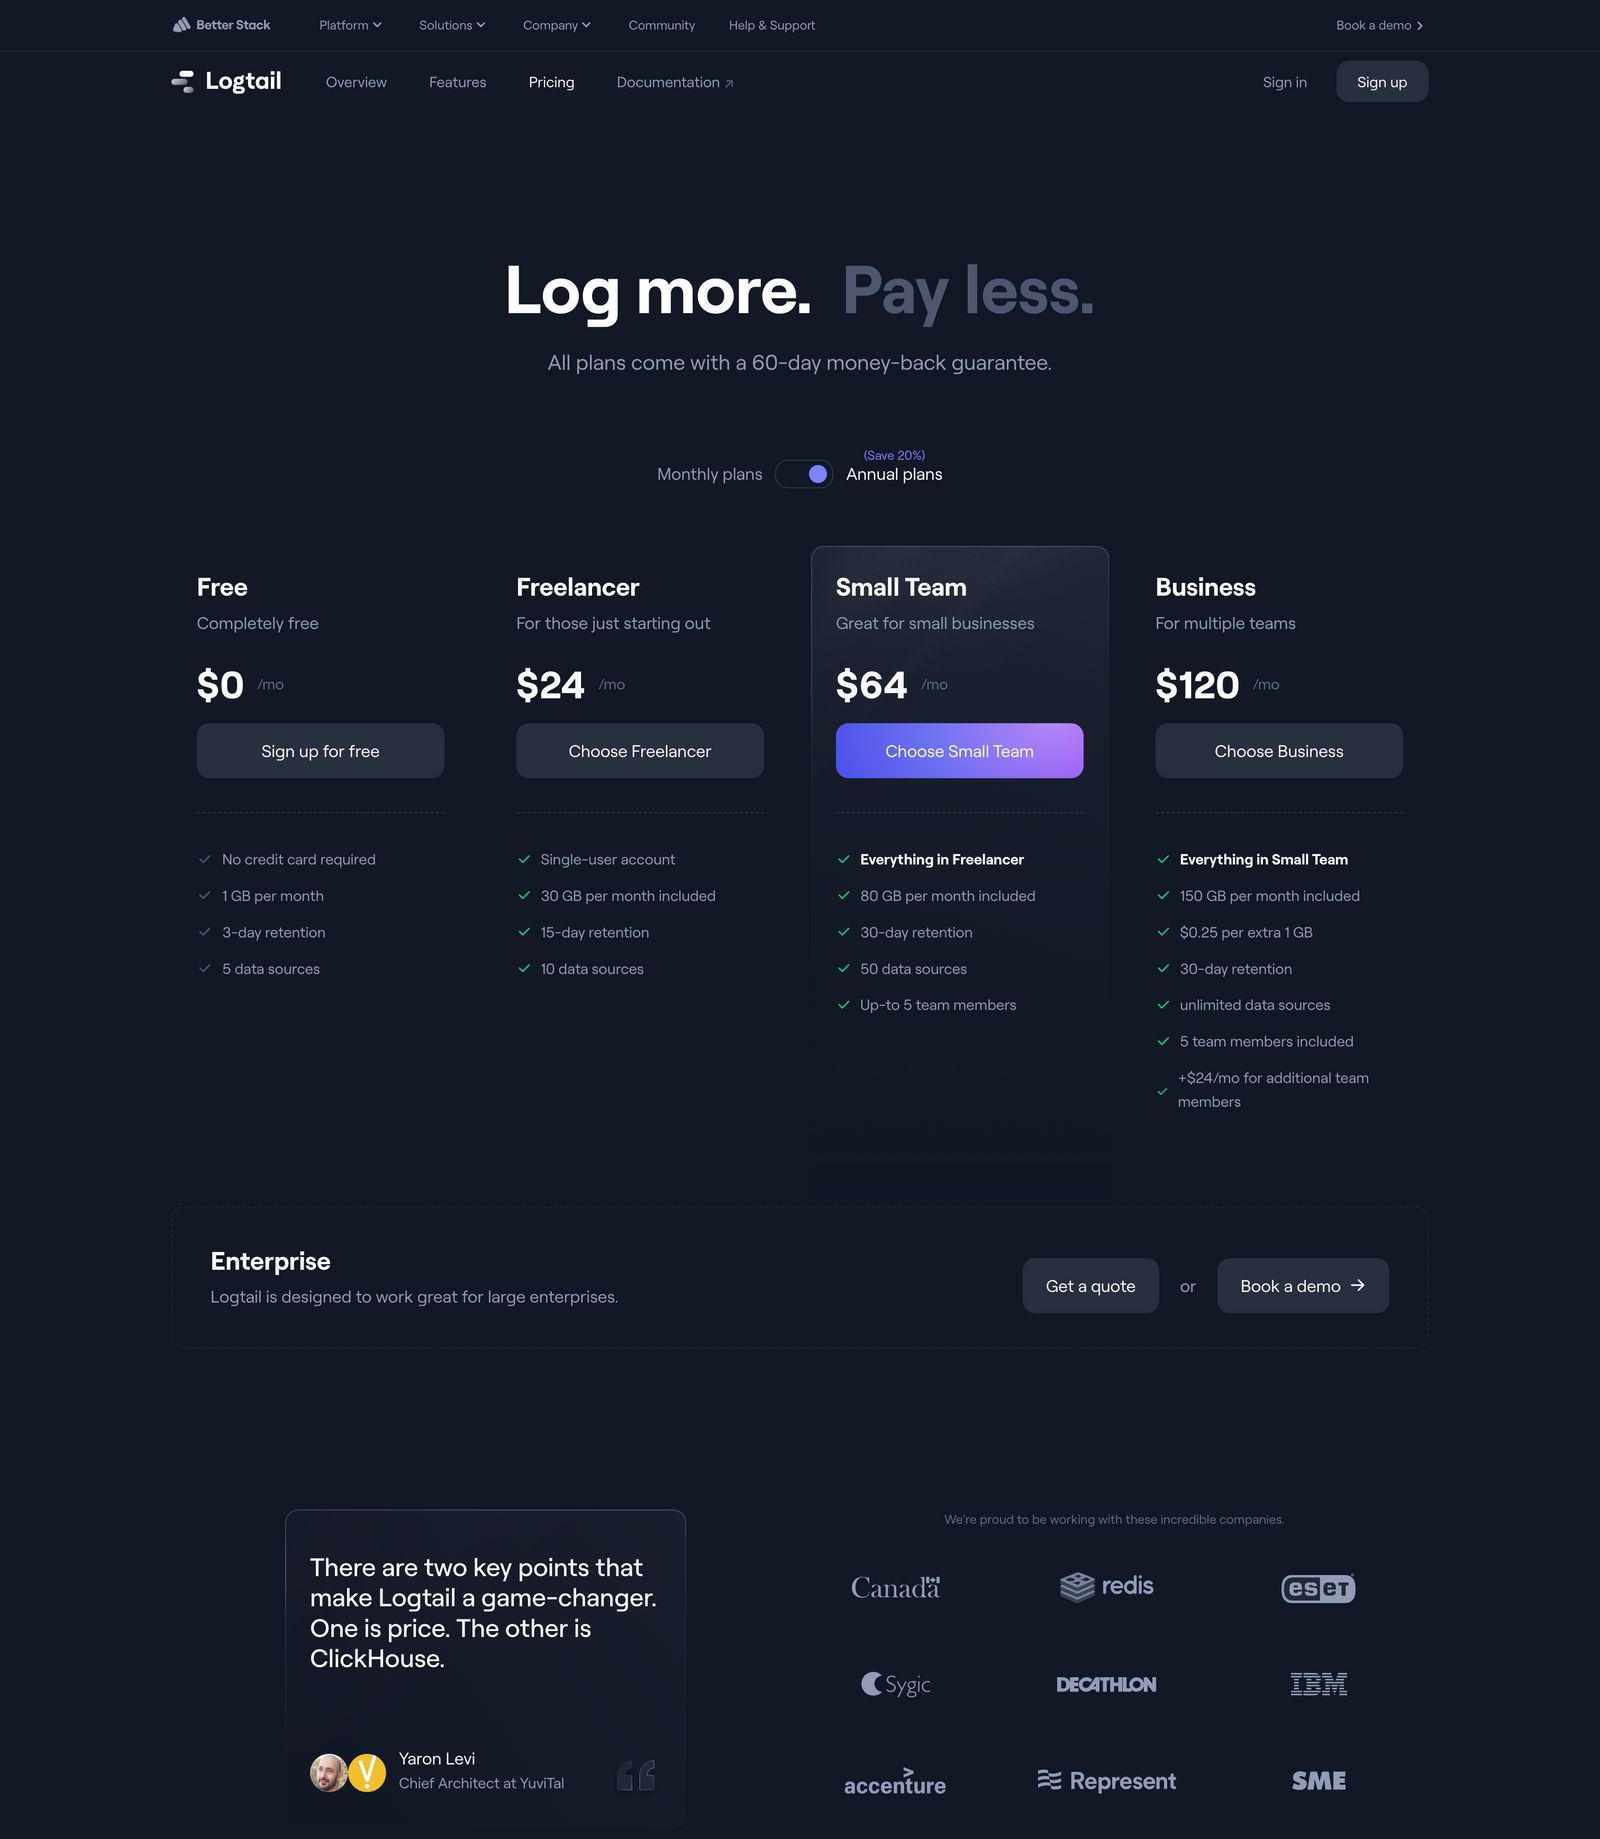 /articles/pricing-page-inspiration/pricing-page-design-example-9.jpg)_Pricing page example from Better Stack